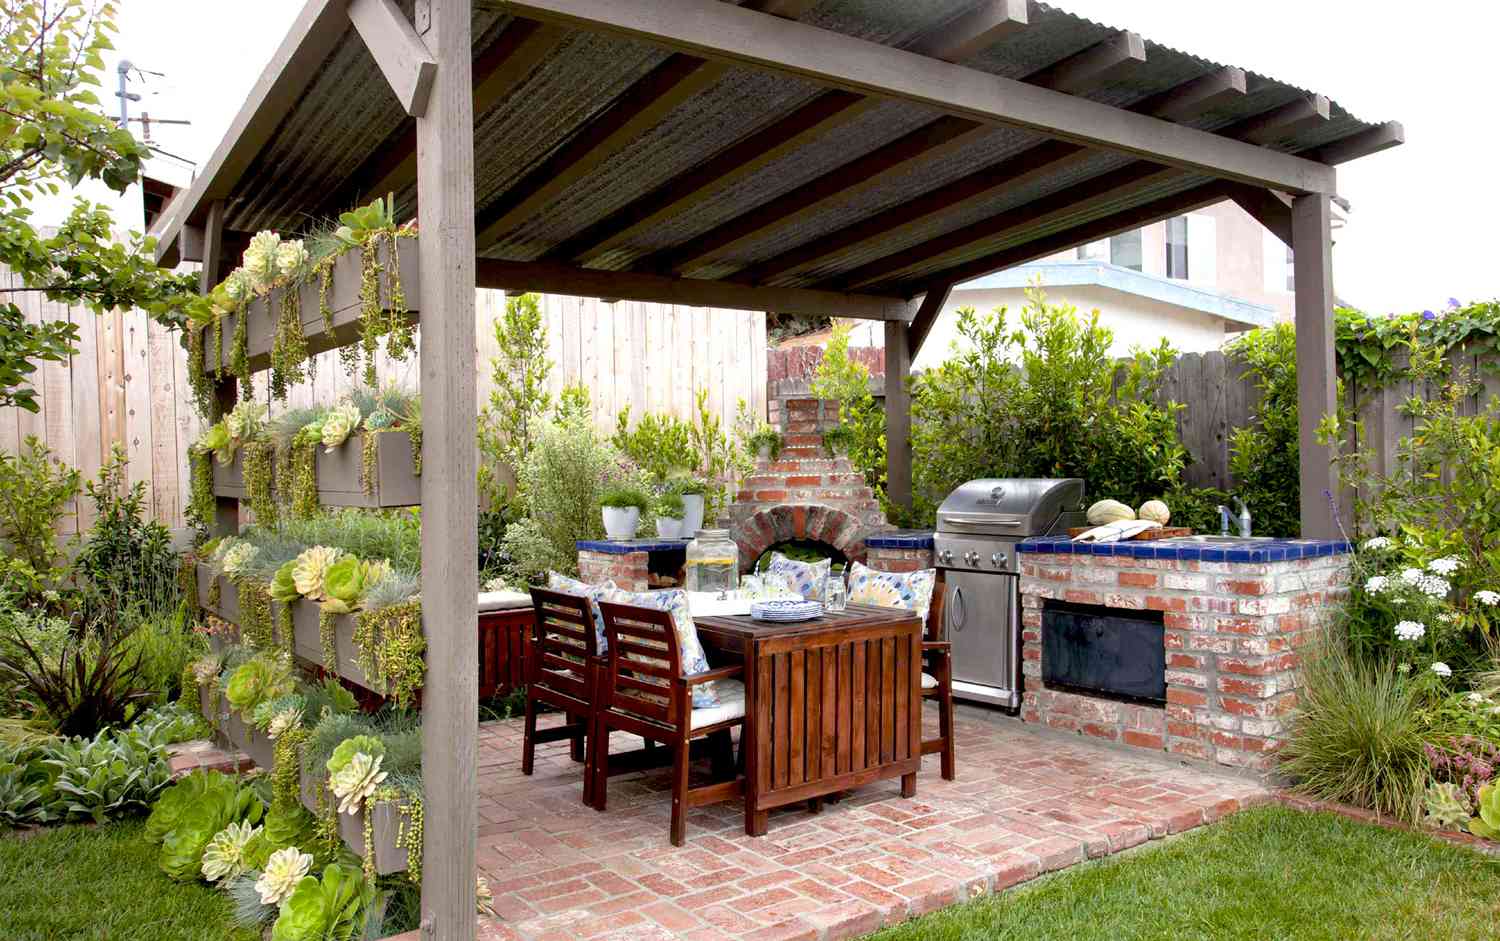 Outdoor pergola and brick kitchen with a dining table